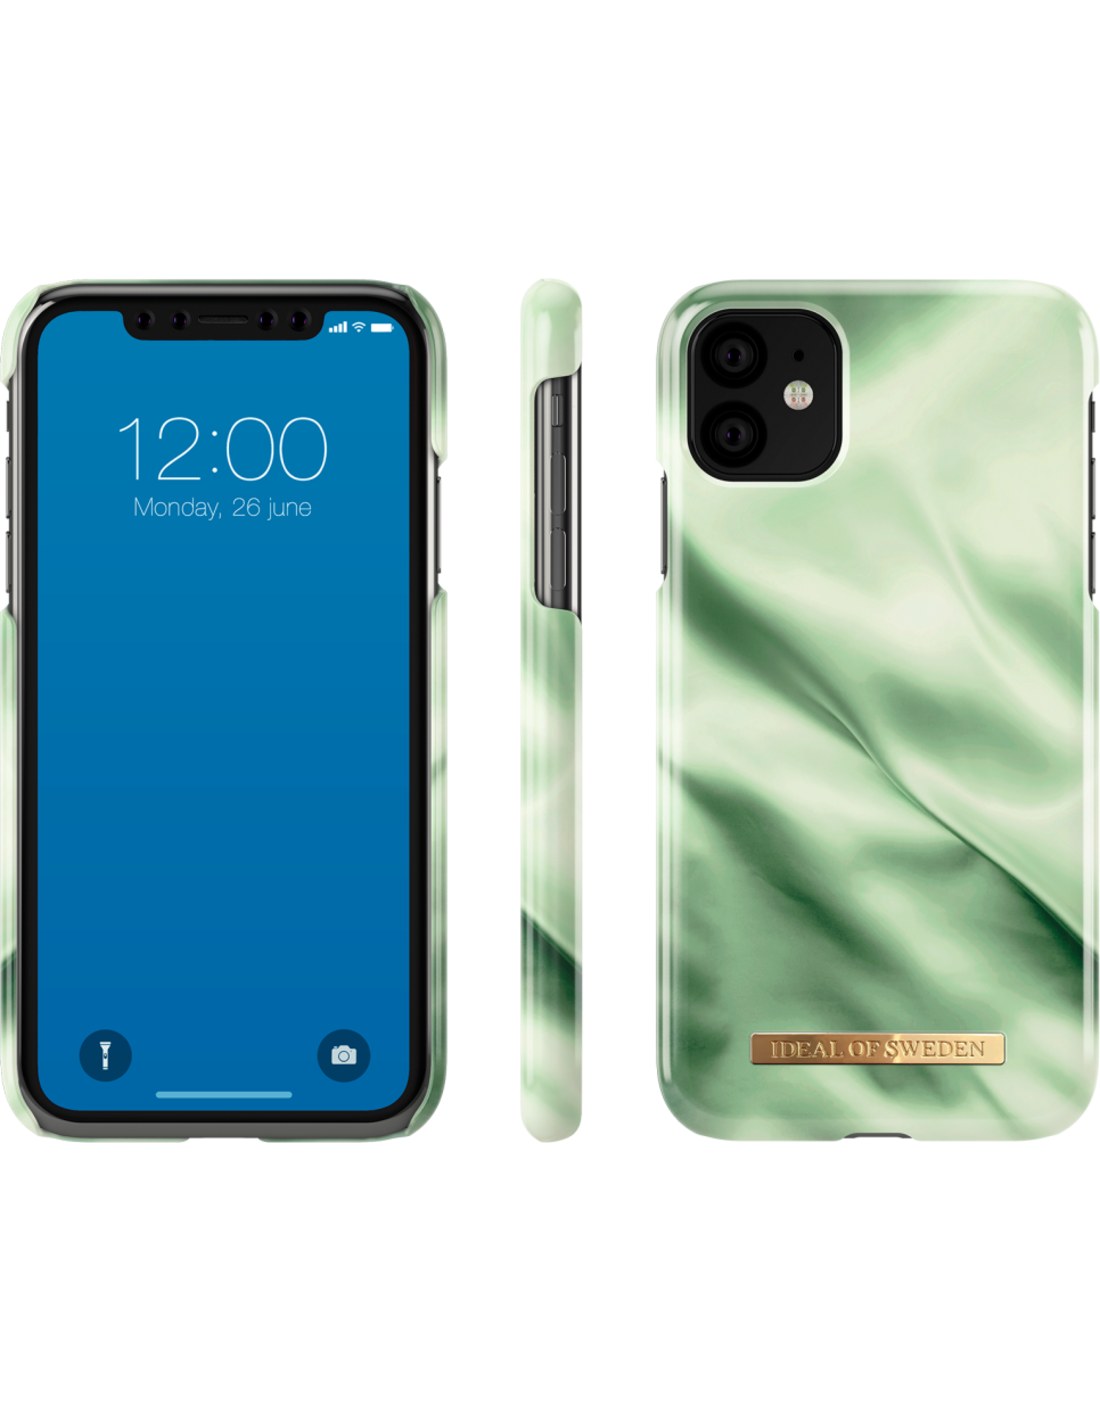 Pistachio IDFCSC19-I1961-189, Satin SWEDEN Backcover, iPhone OF IDEAL 11, iPhone XR, Apple,